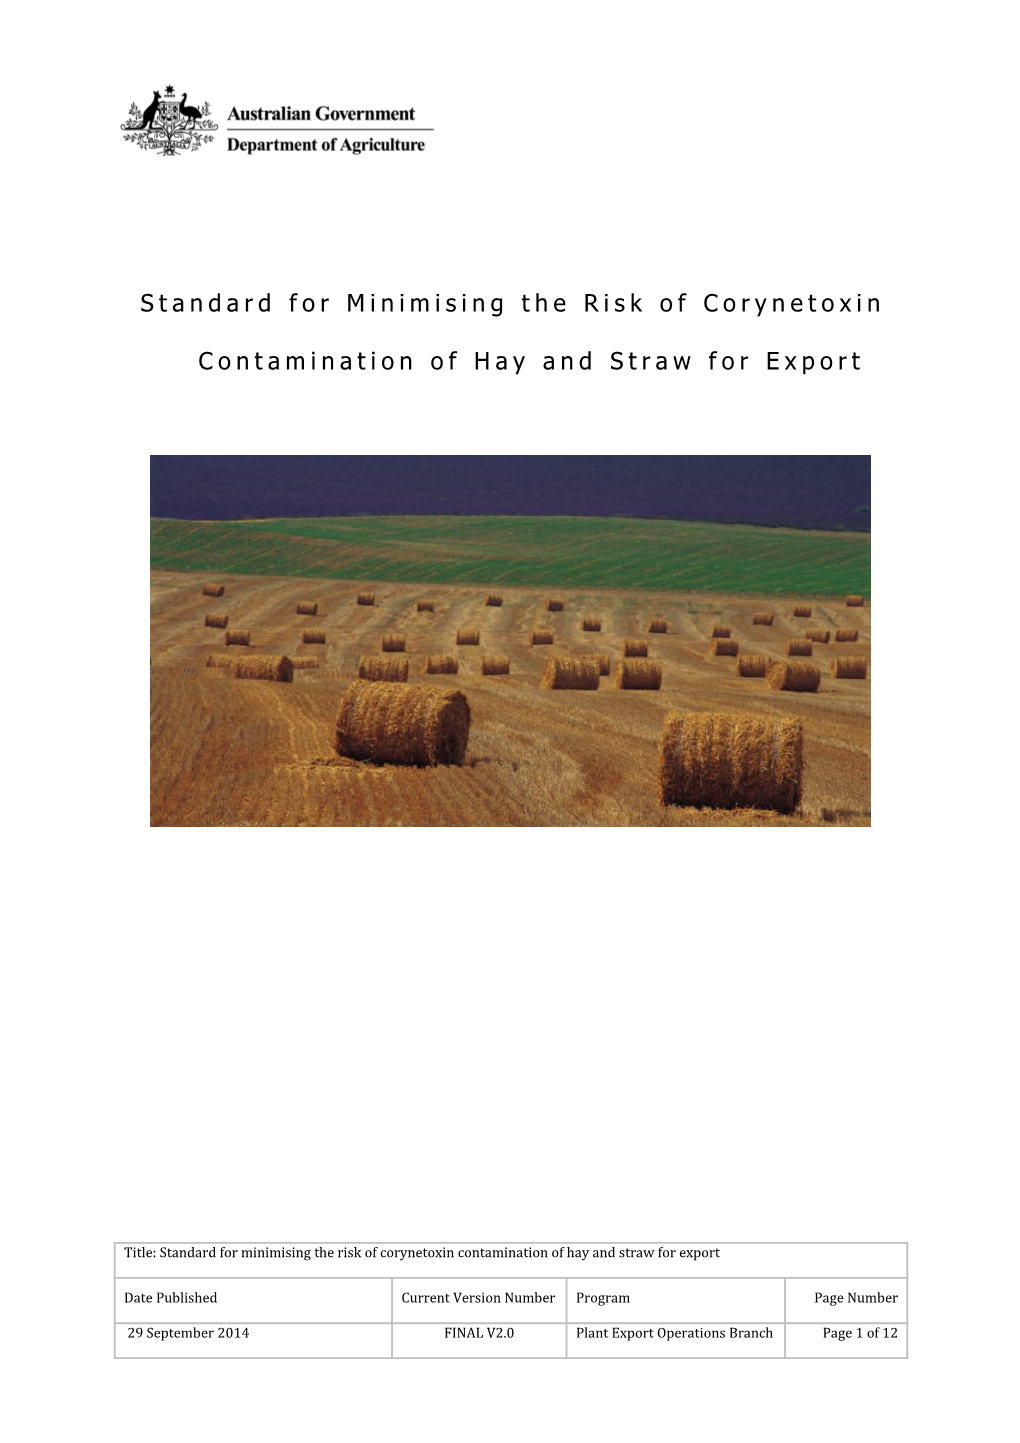 Standardfor Minimising the Risk Ofcorynetoxin Contamination Ofhay and Straw for Export